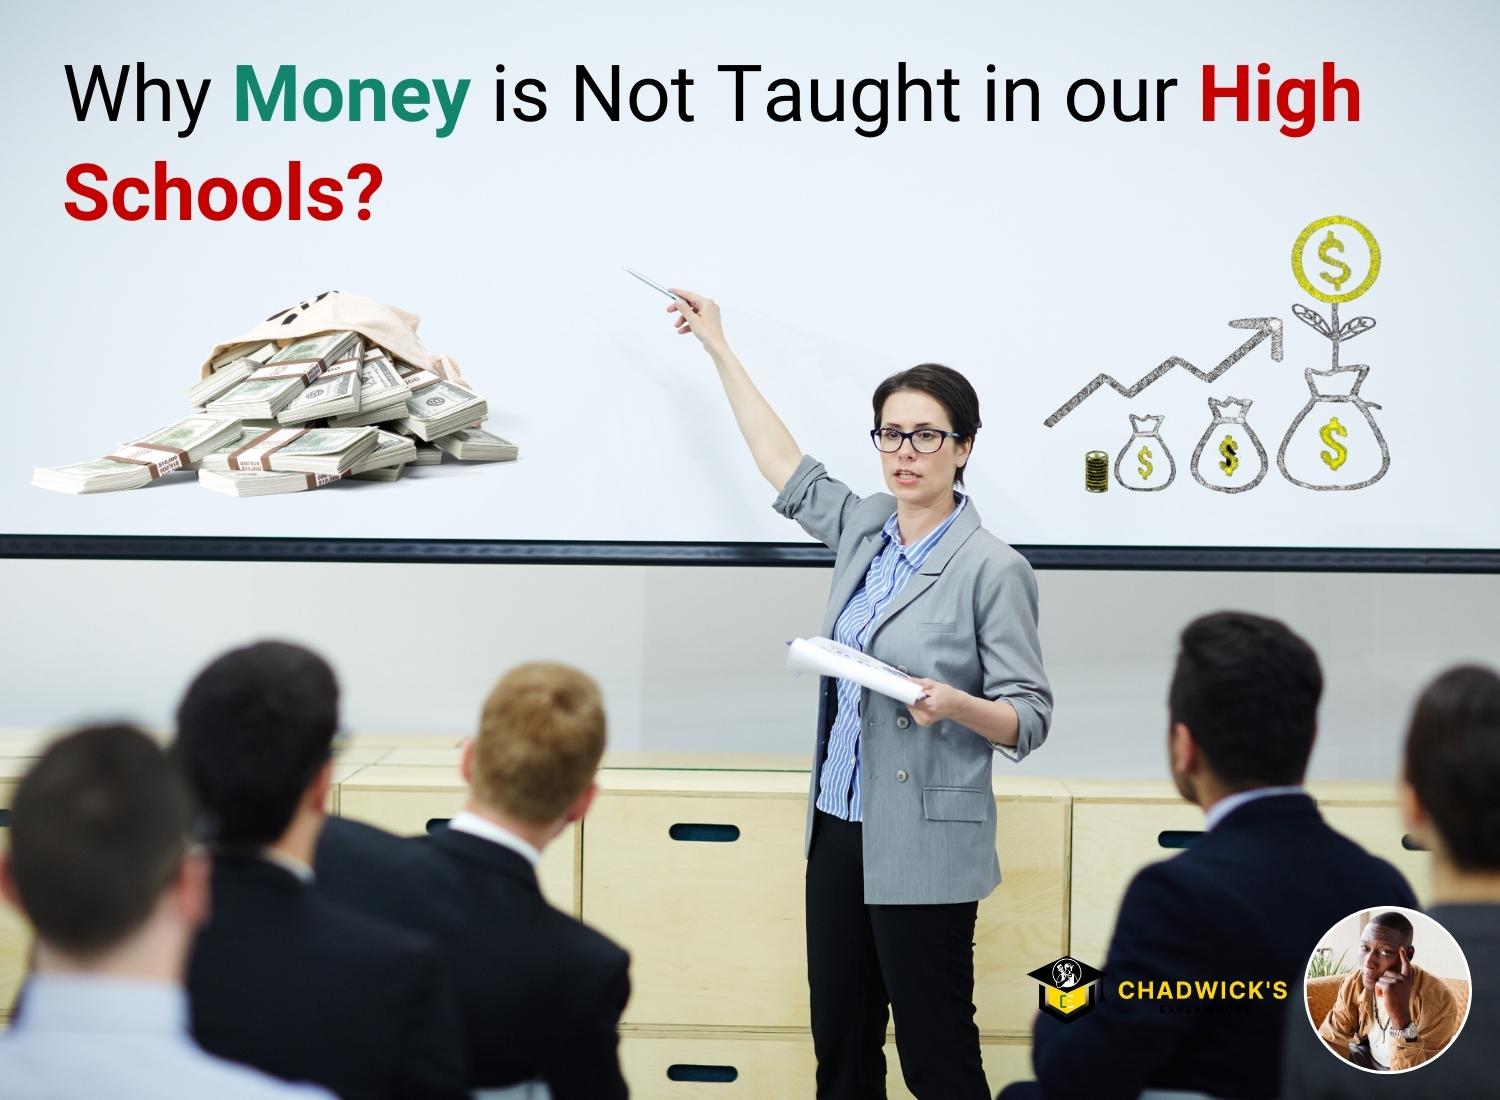 Why Money is Not Taught in our High Schools